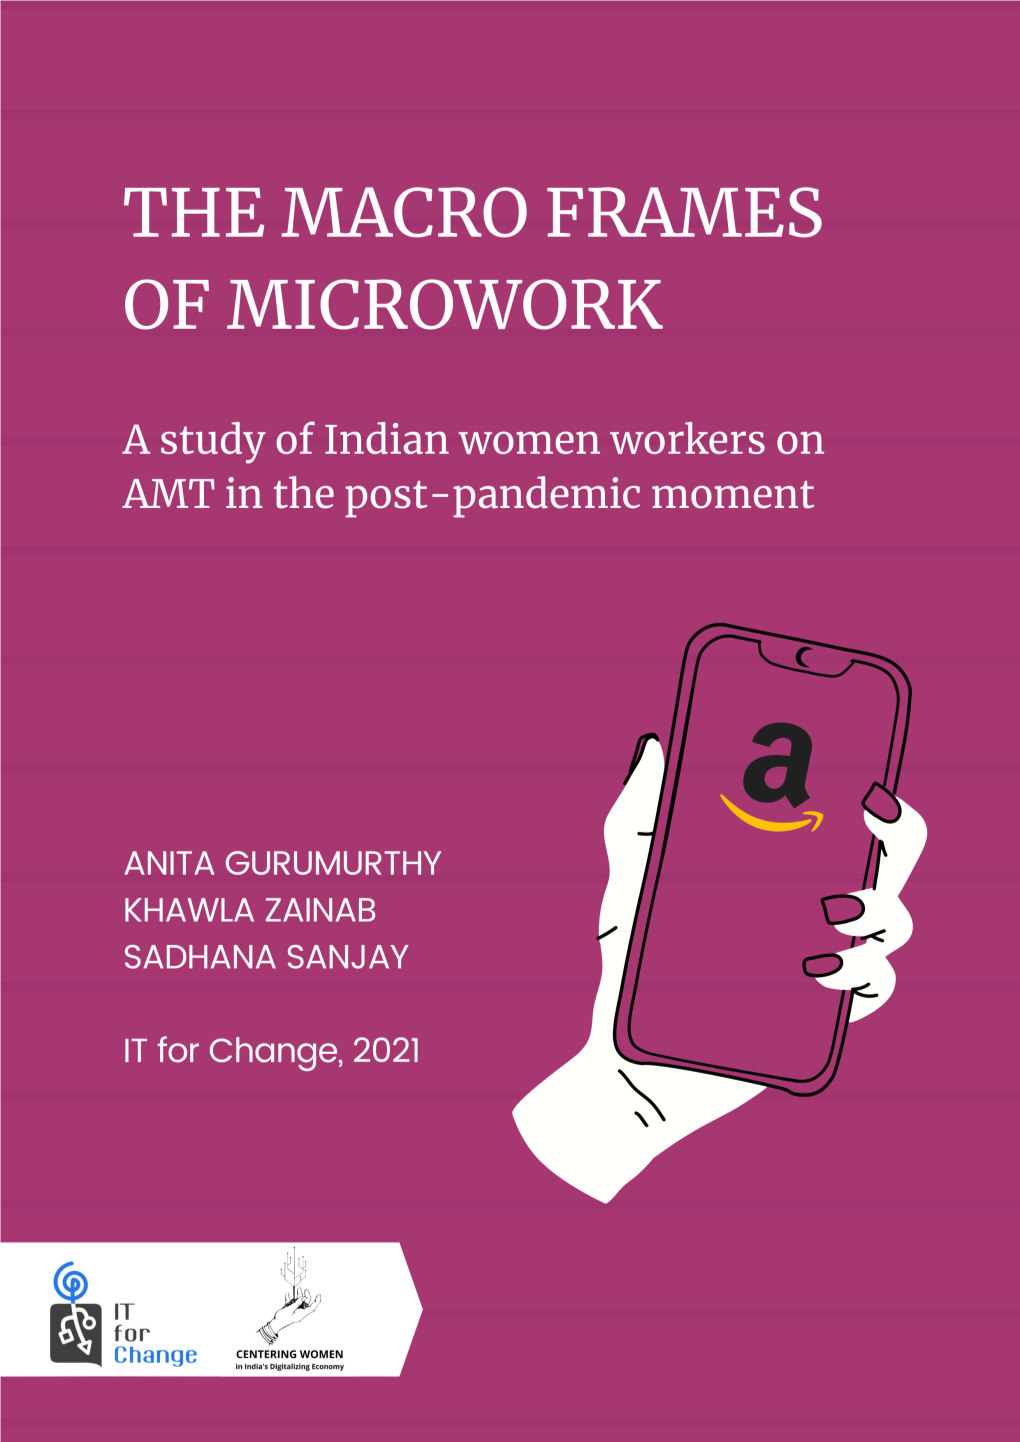 The Macro Frames of Microwork a Study of Indian Women Workers on AMT in the Post-Pandemic Moment